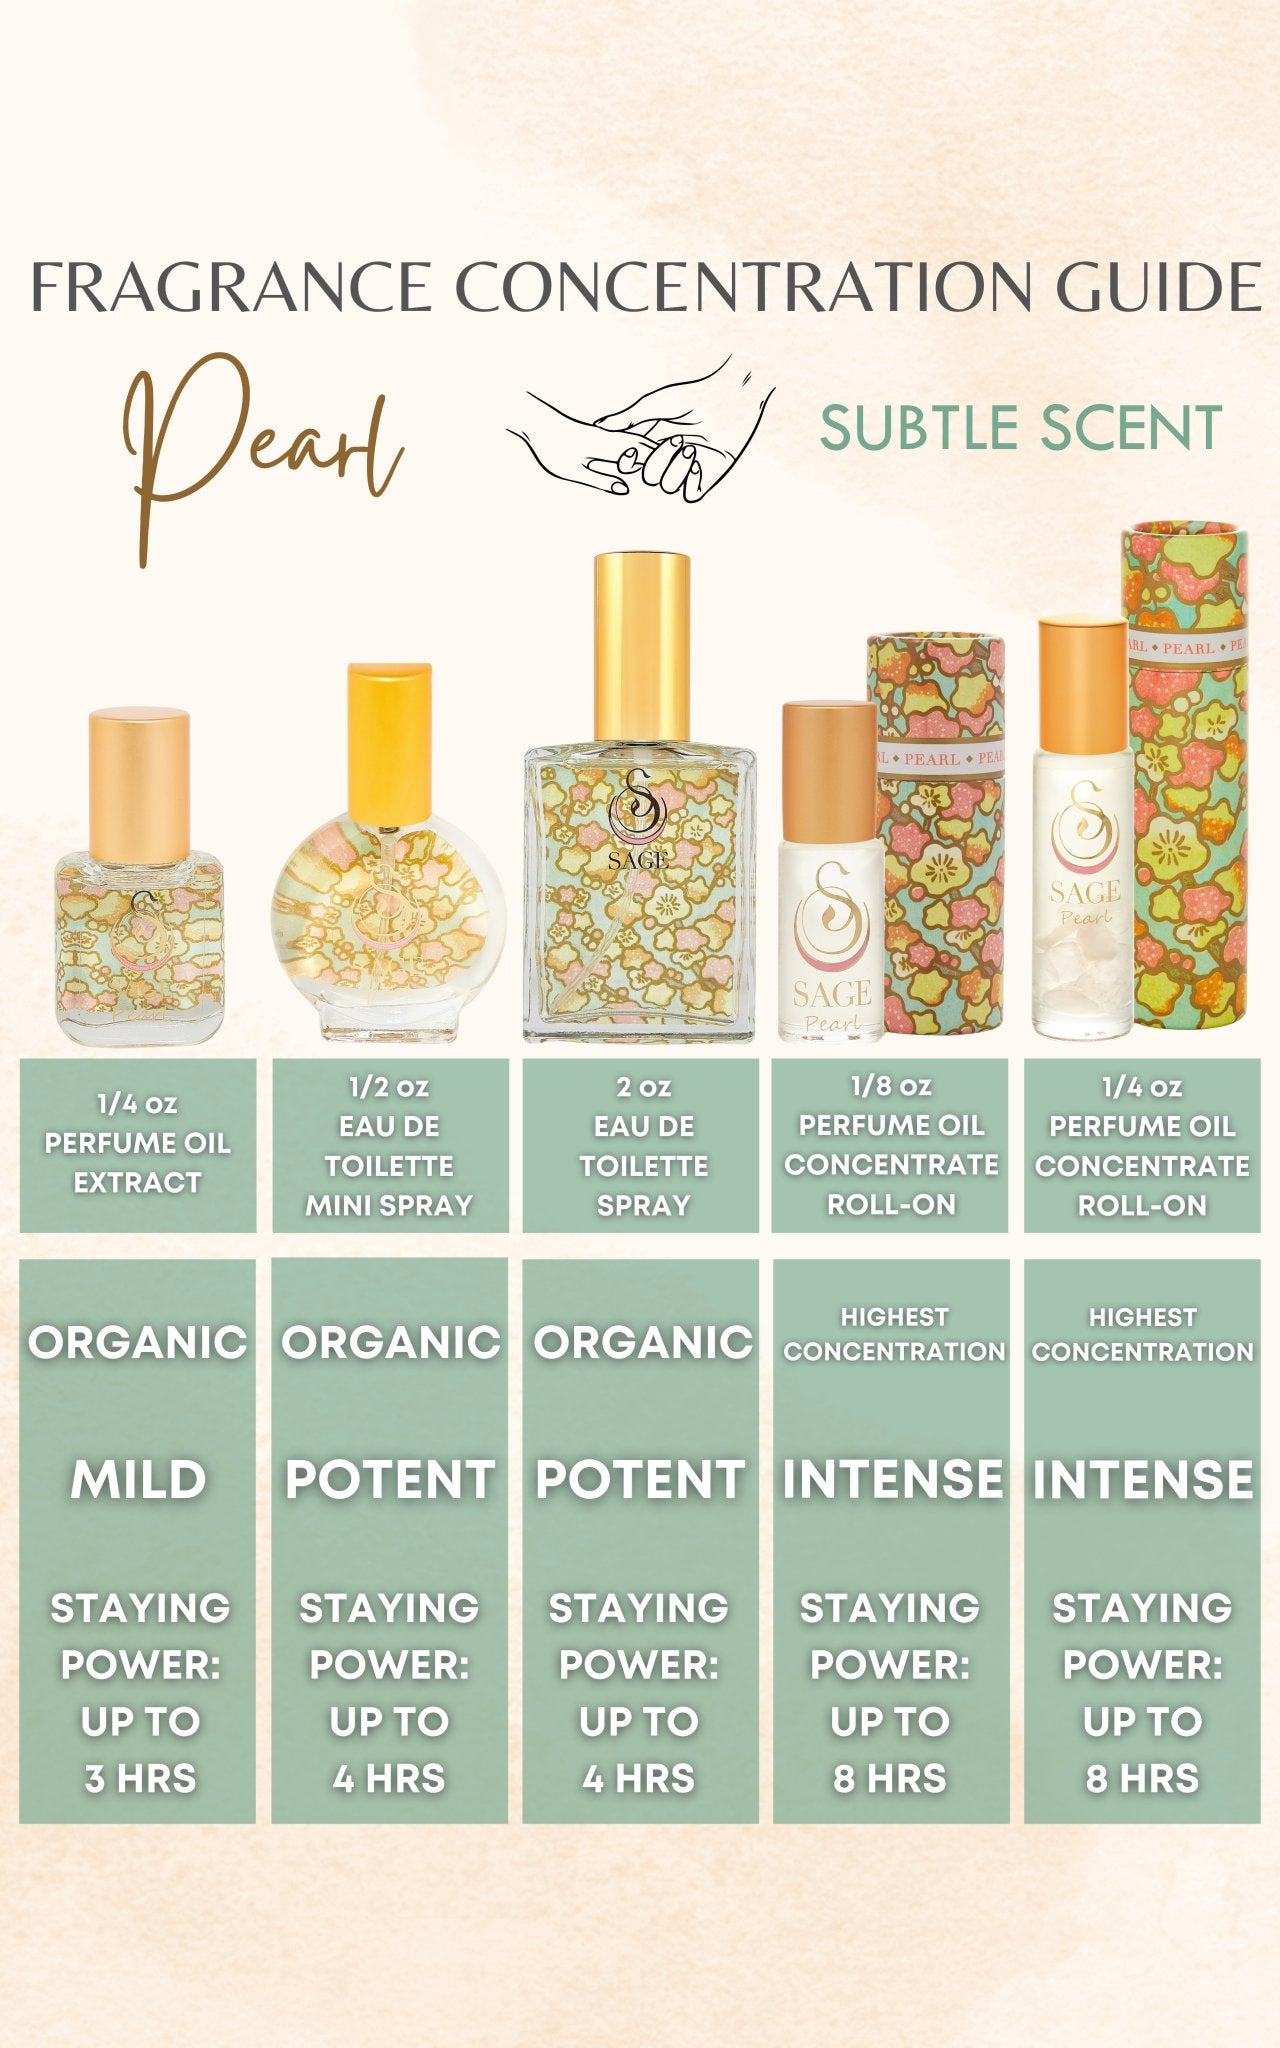 Pearl 1/4 oz Gemstone Perfume Oil Concentrate Roll-On by Sage - The Sage Lifestyle